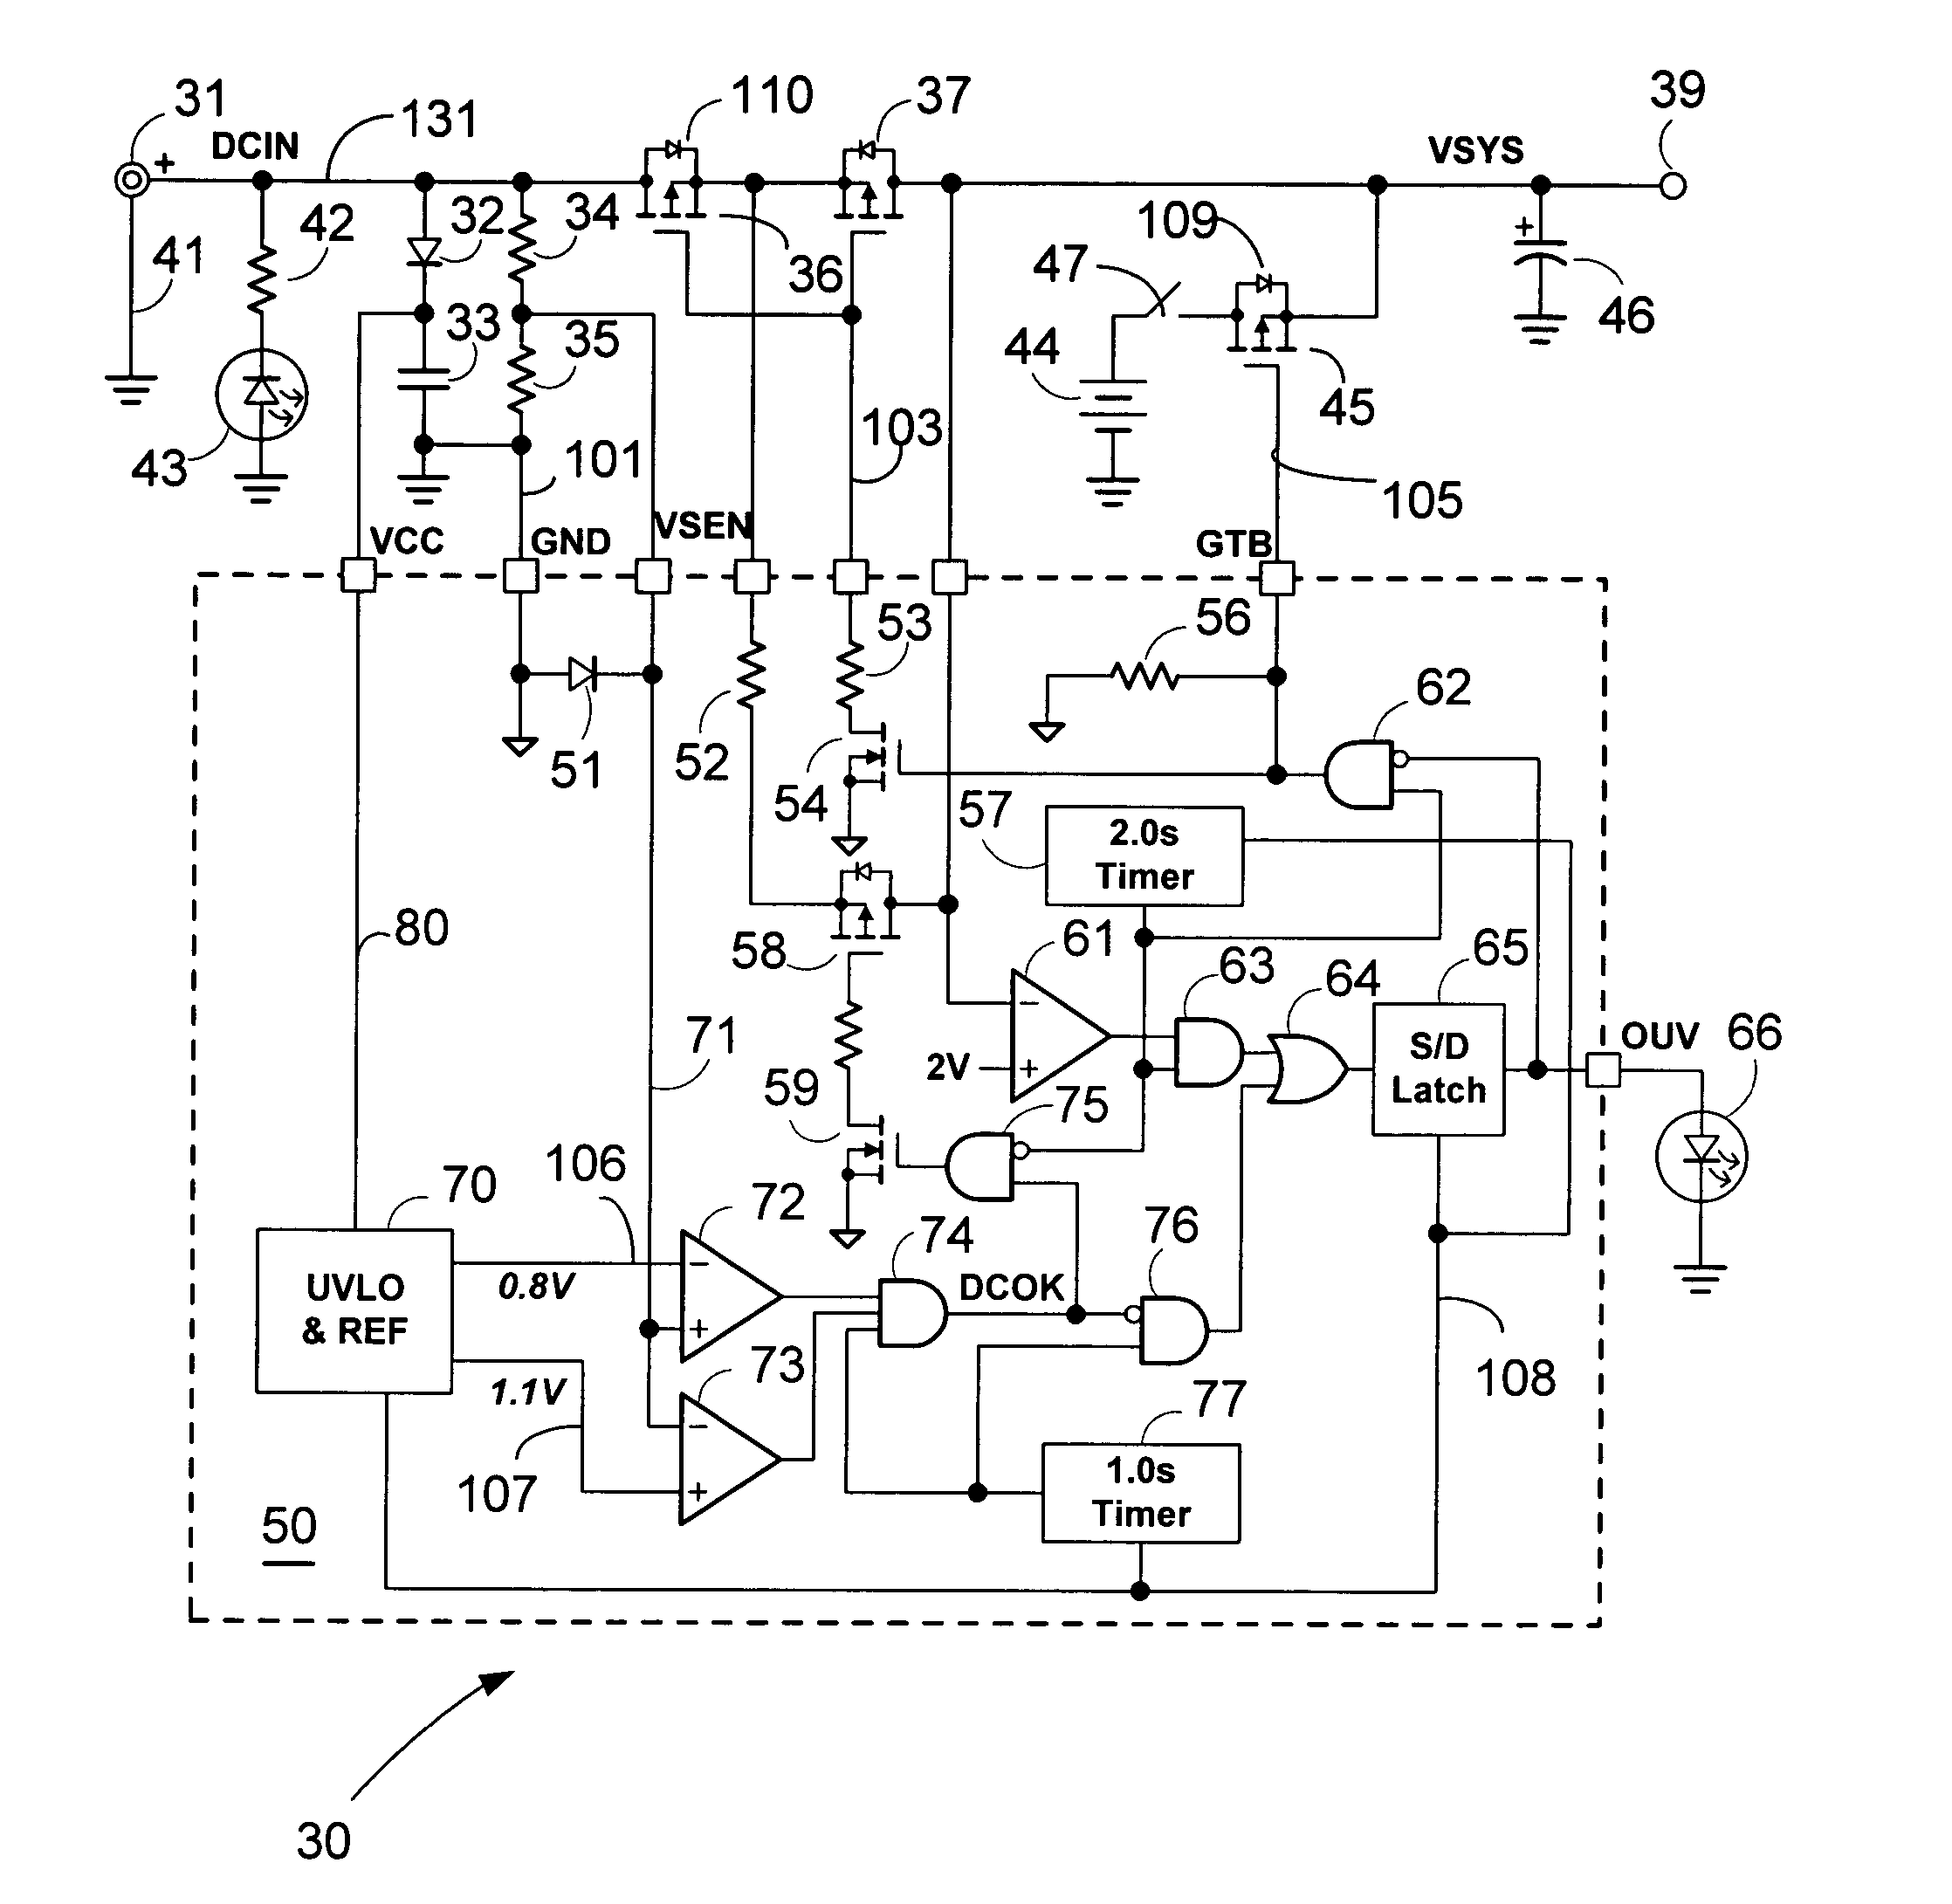 Power adapter interface circuitry for protecting a battery operated system